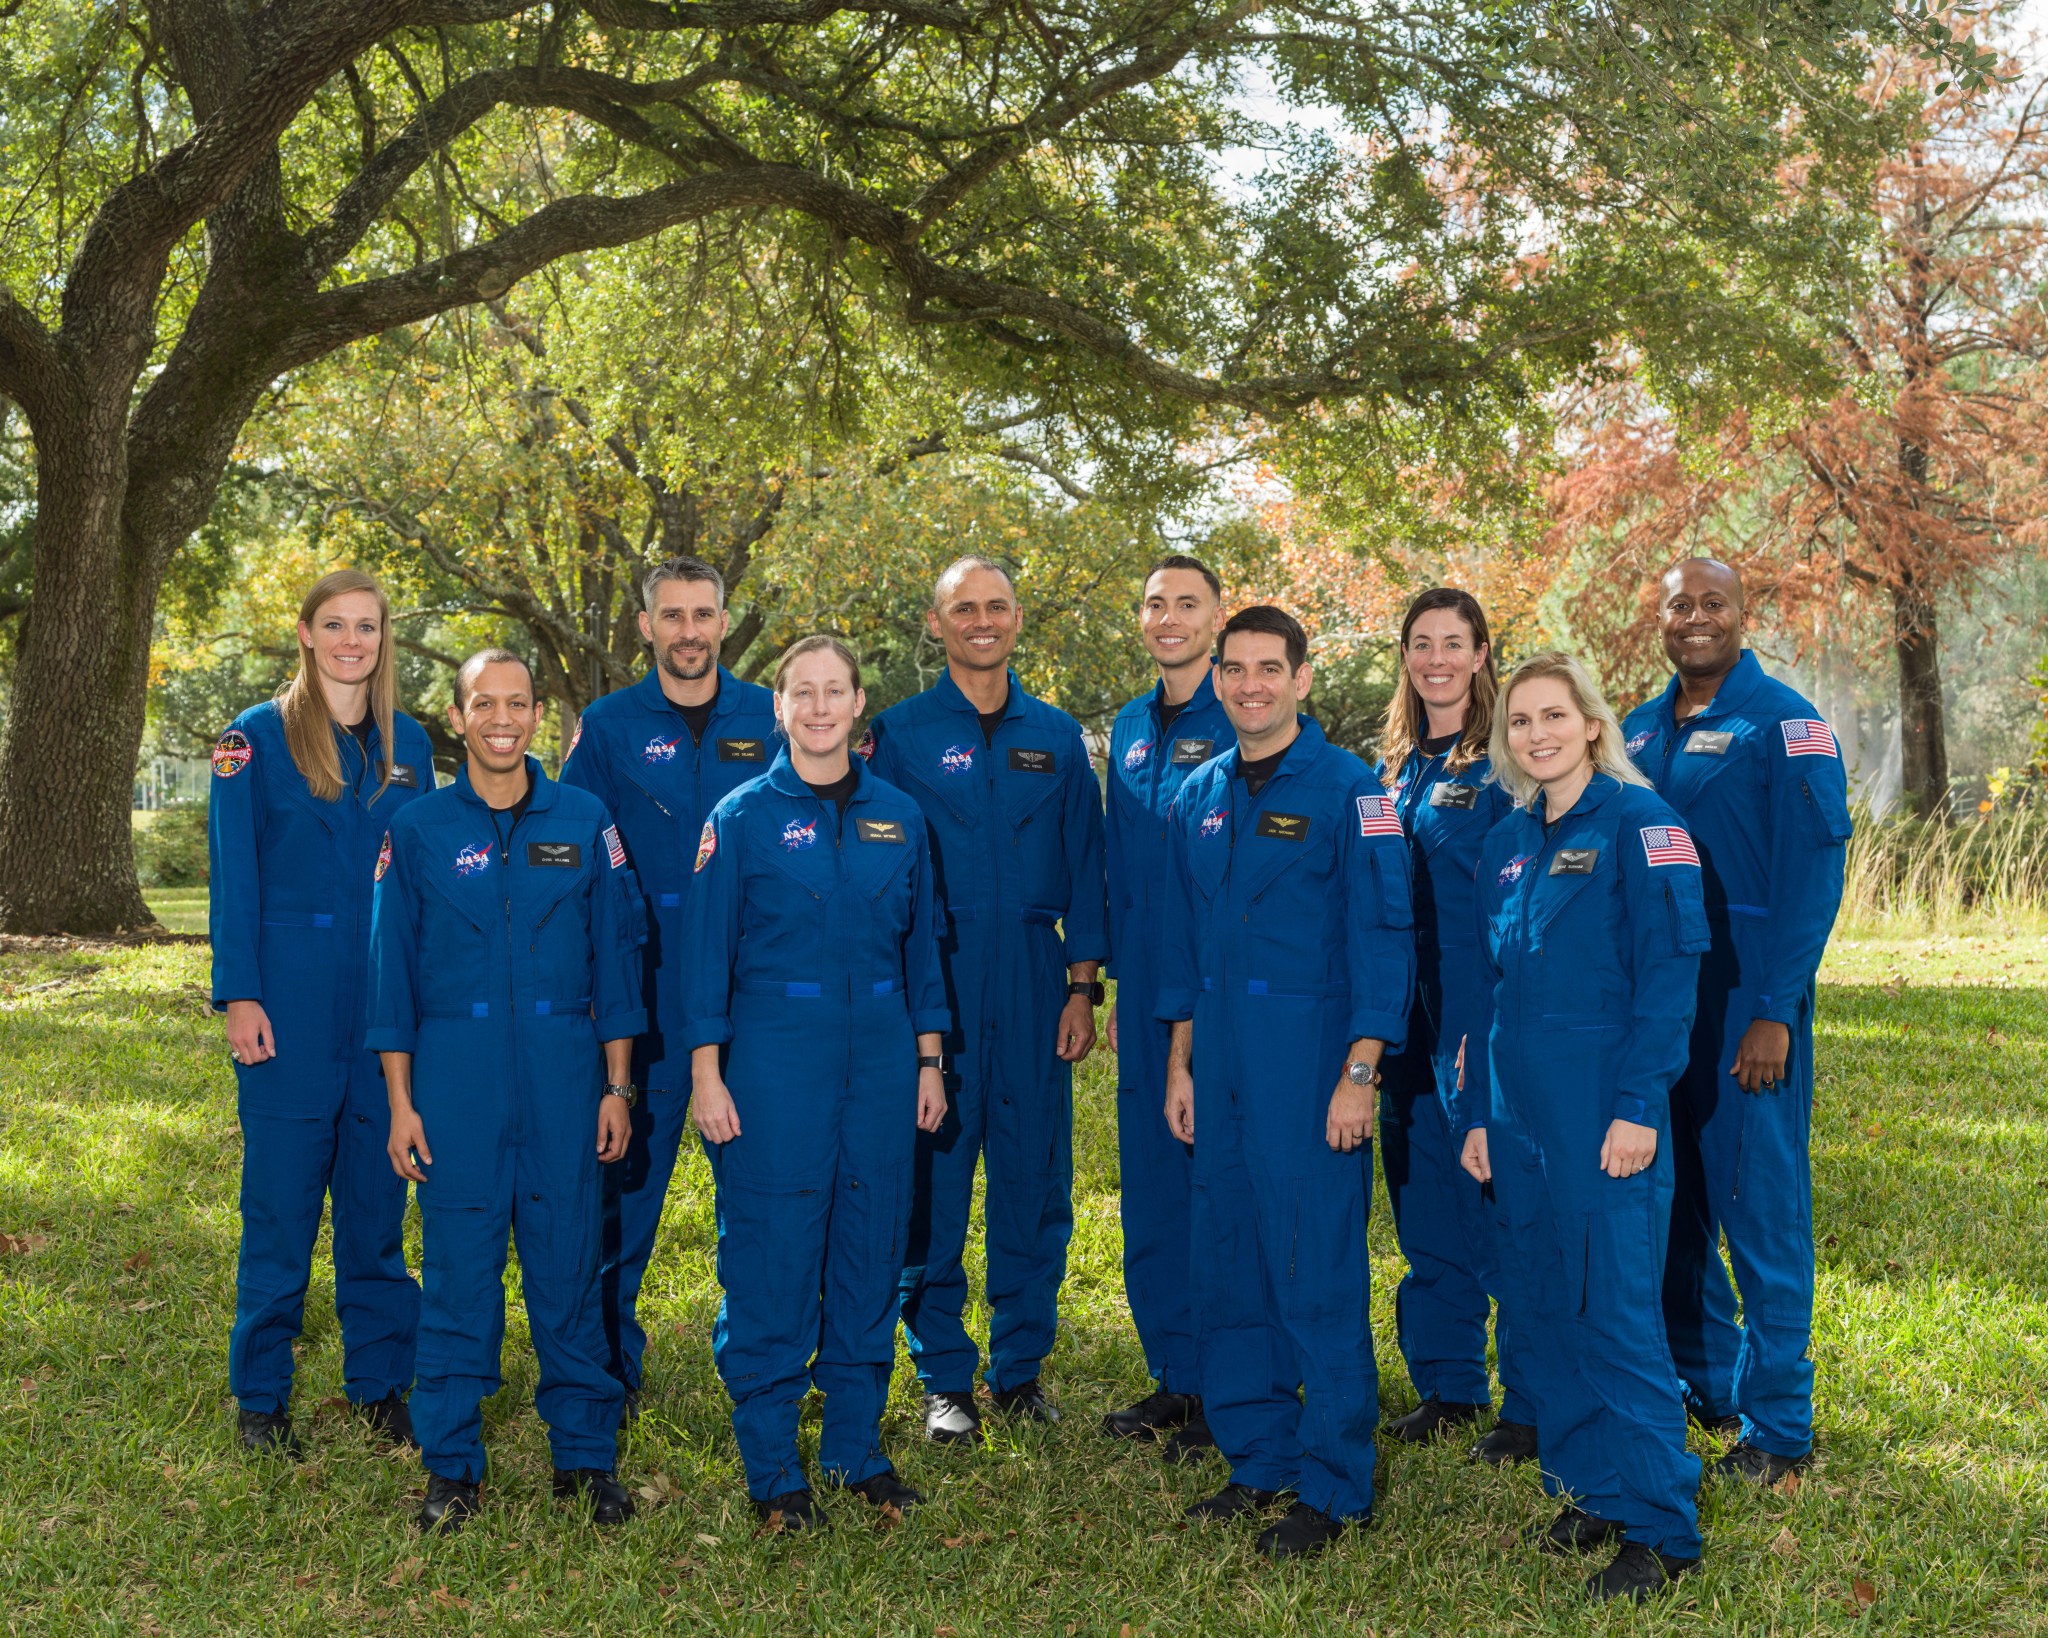 Group photo of the new class of astronaut candidates